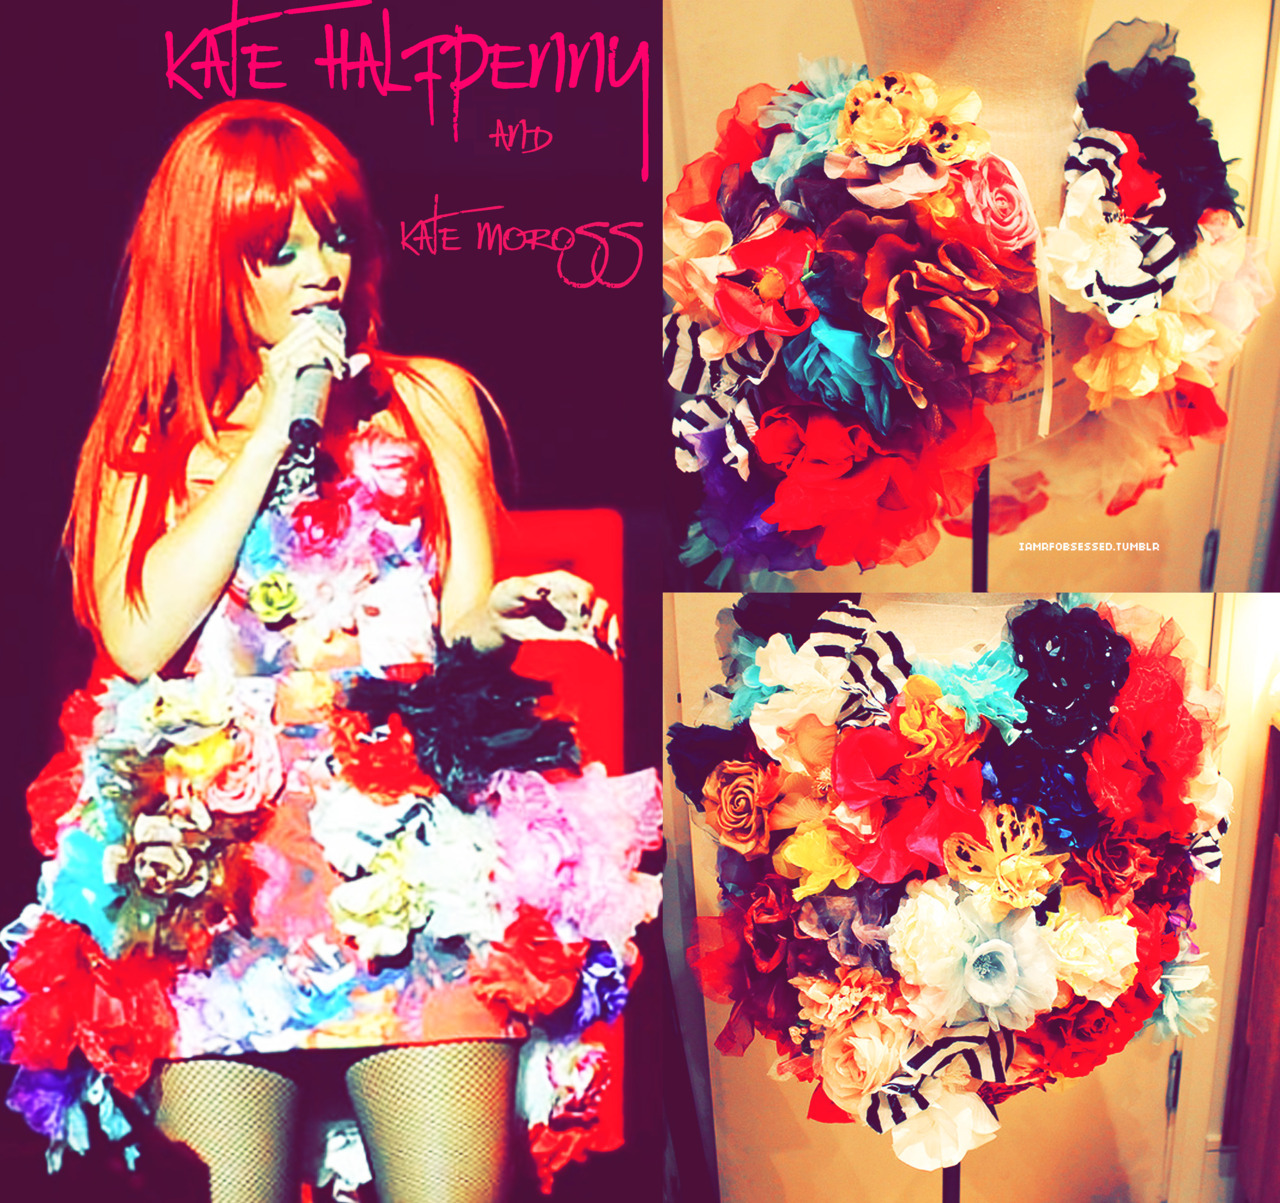 A new outfit for her Australian tour, some of you may recognise this from her performance during the EMA awards. A flower detailed dress made by Kate Halfpenny and the flowers were hand painted by Kate Moross.

photo credit Kate moross